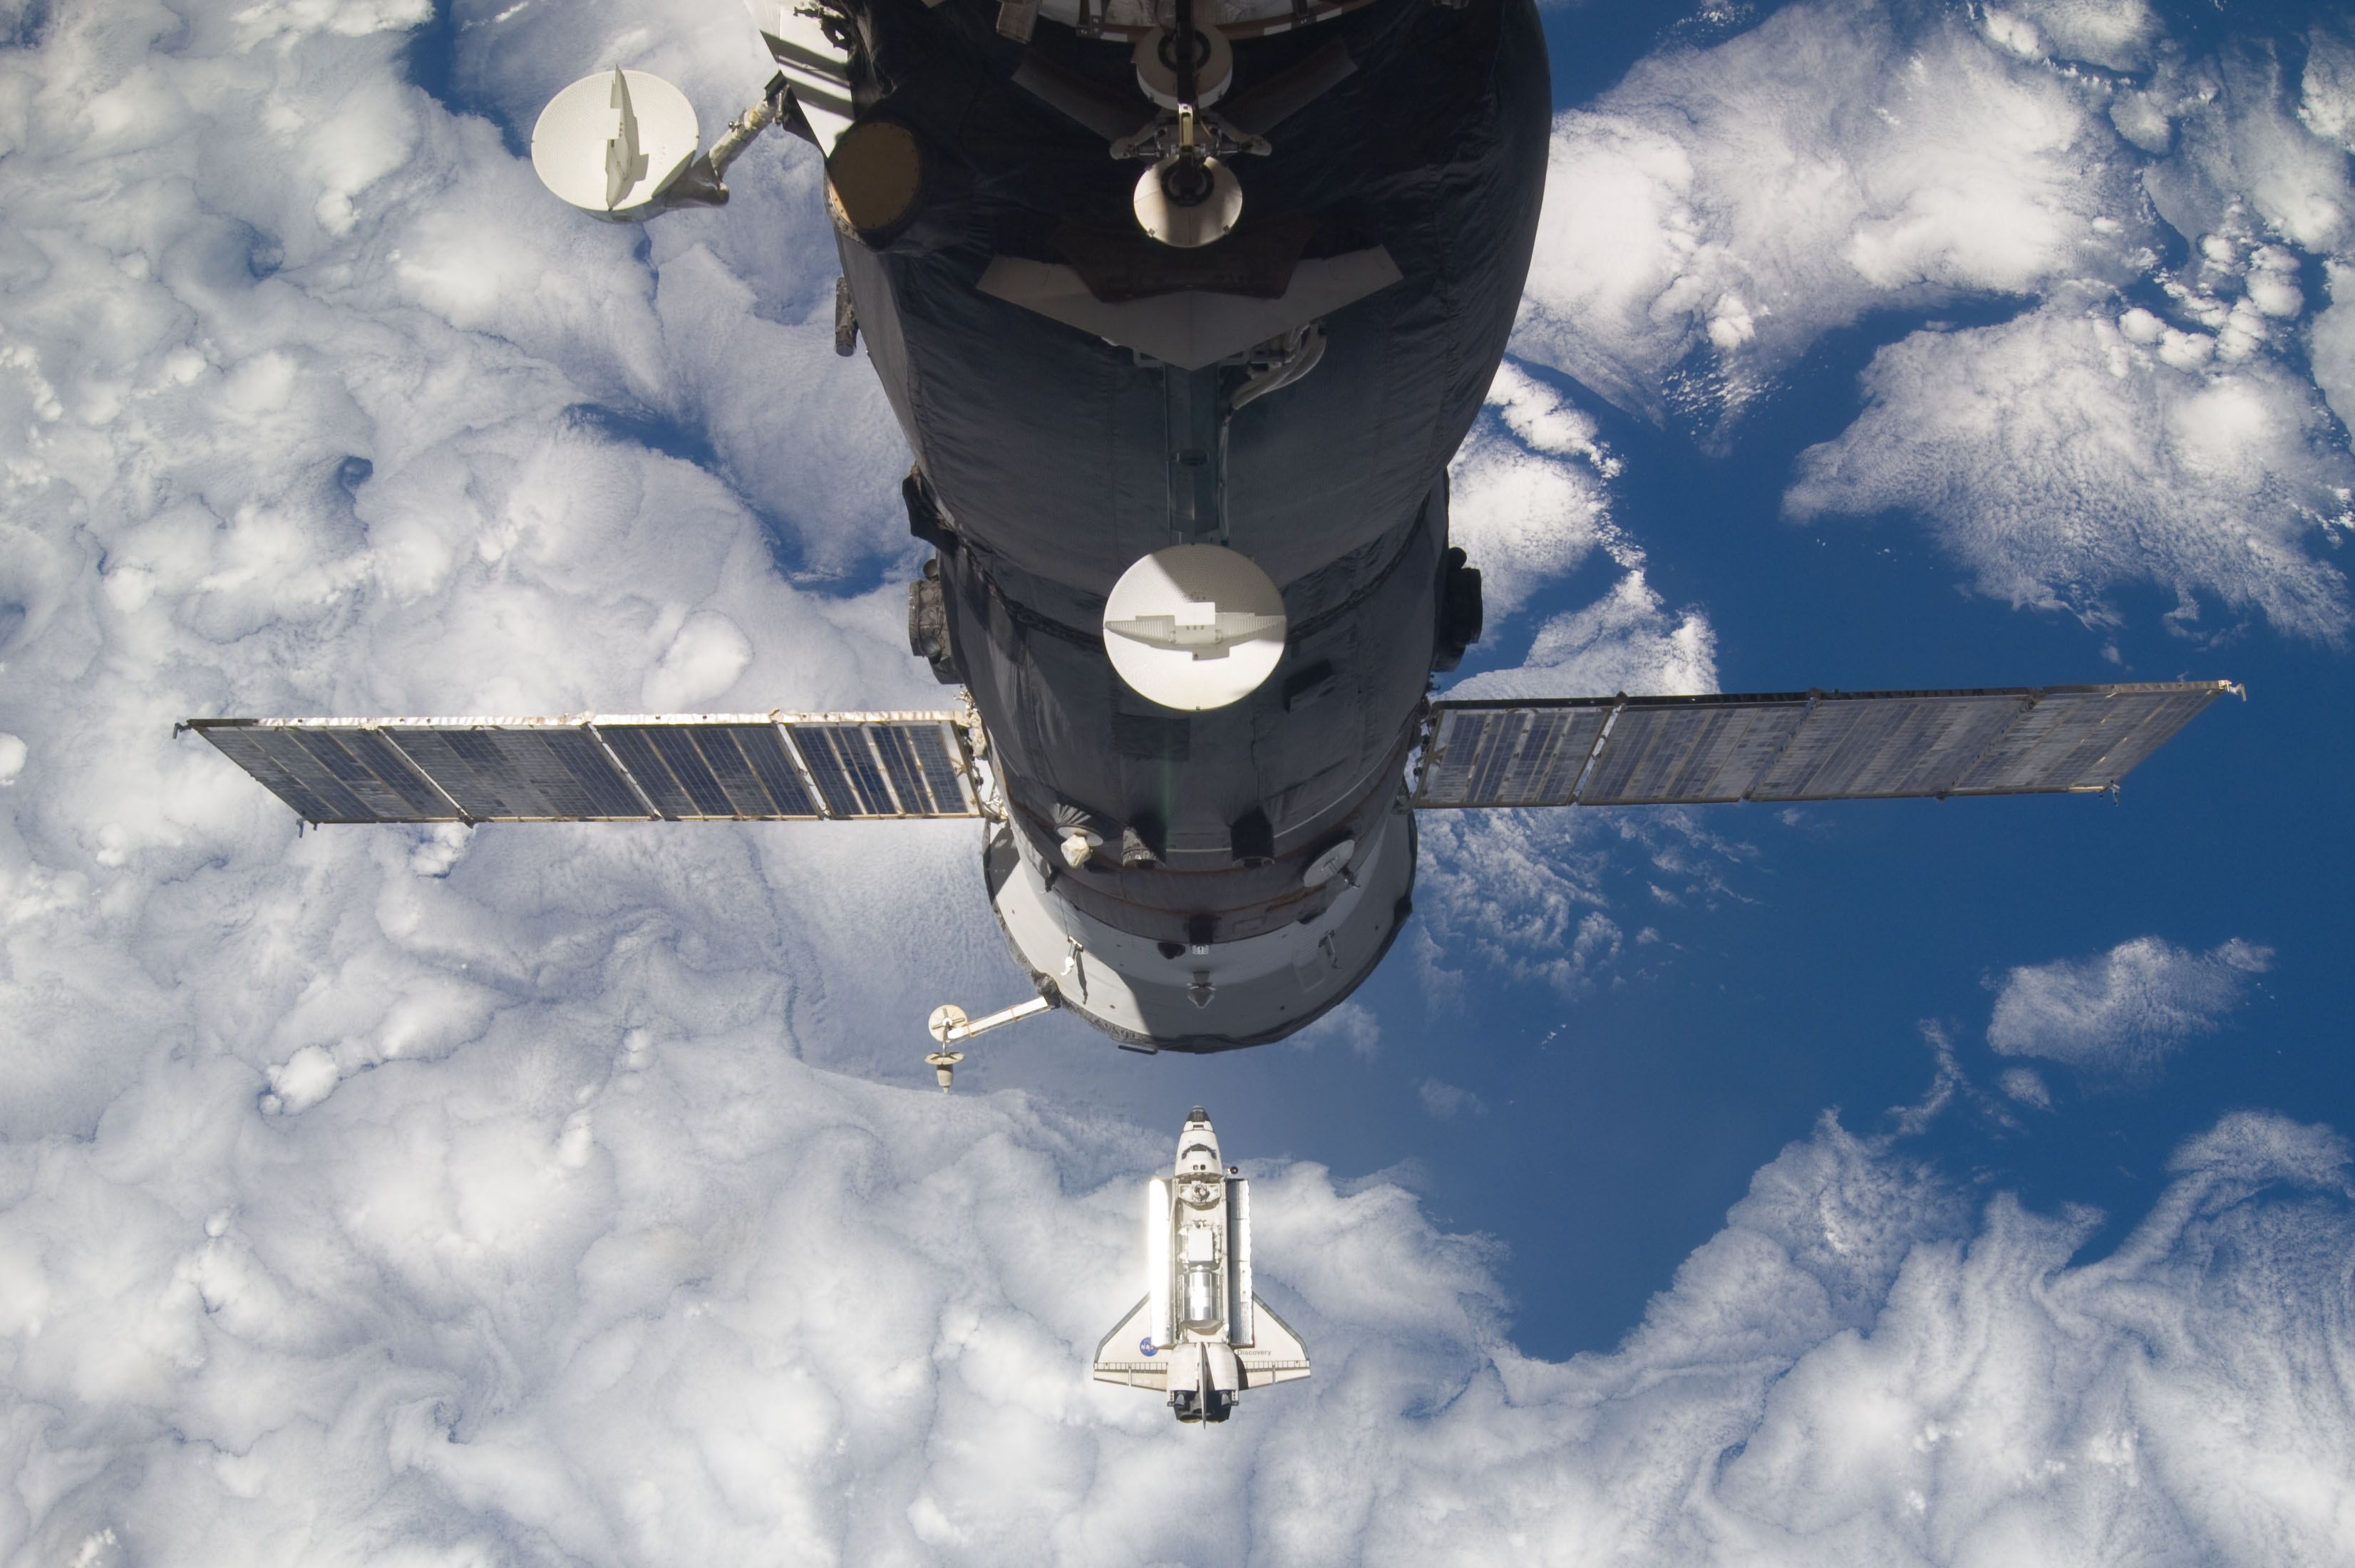 STS-133 Discovery approaches the ISS